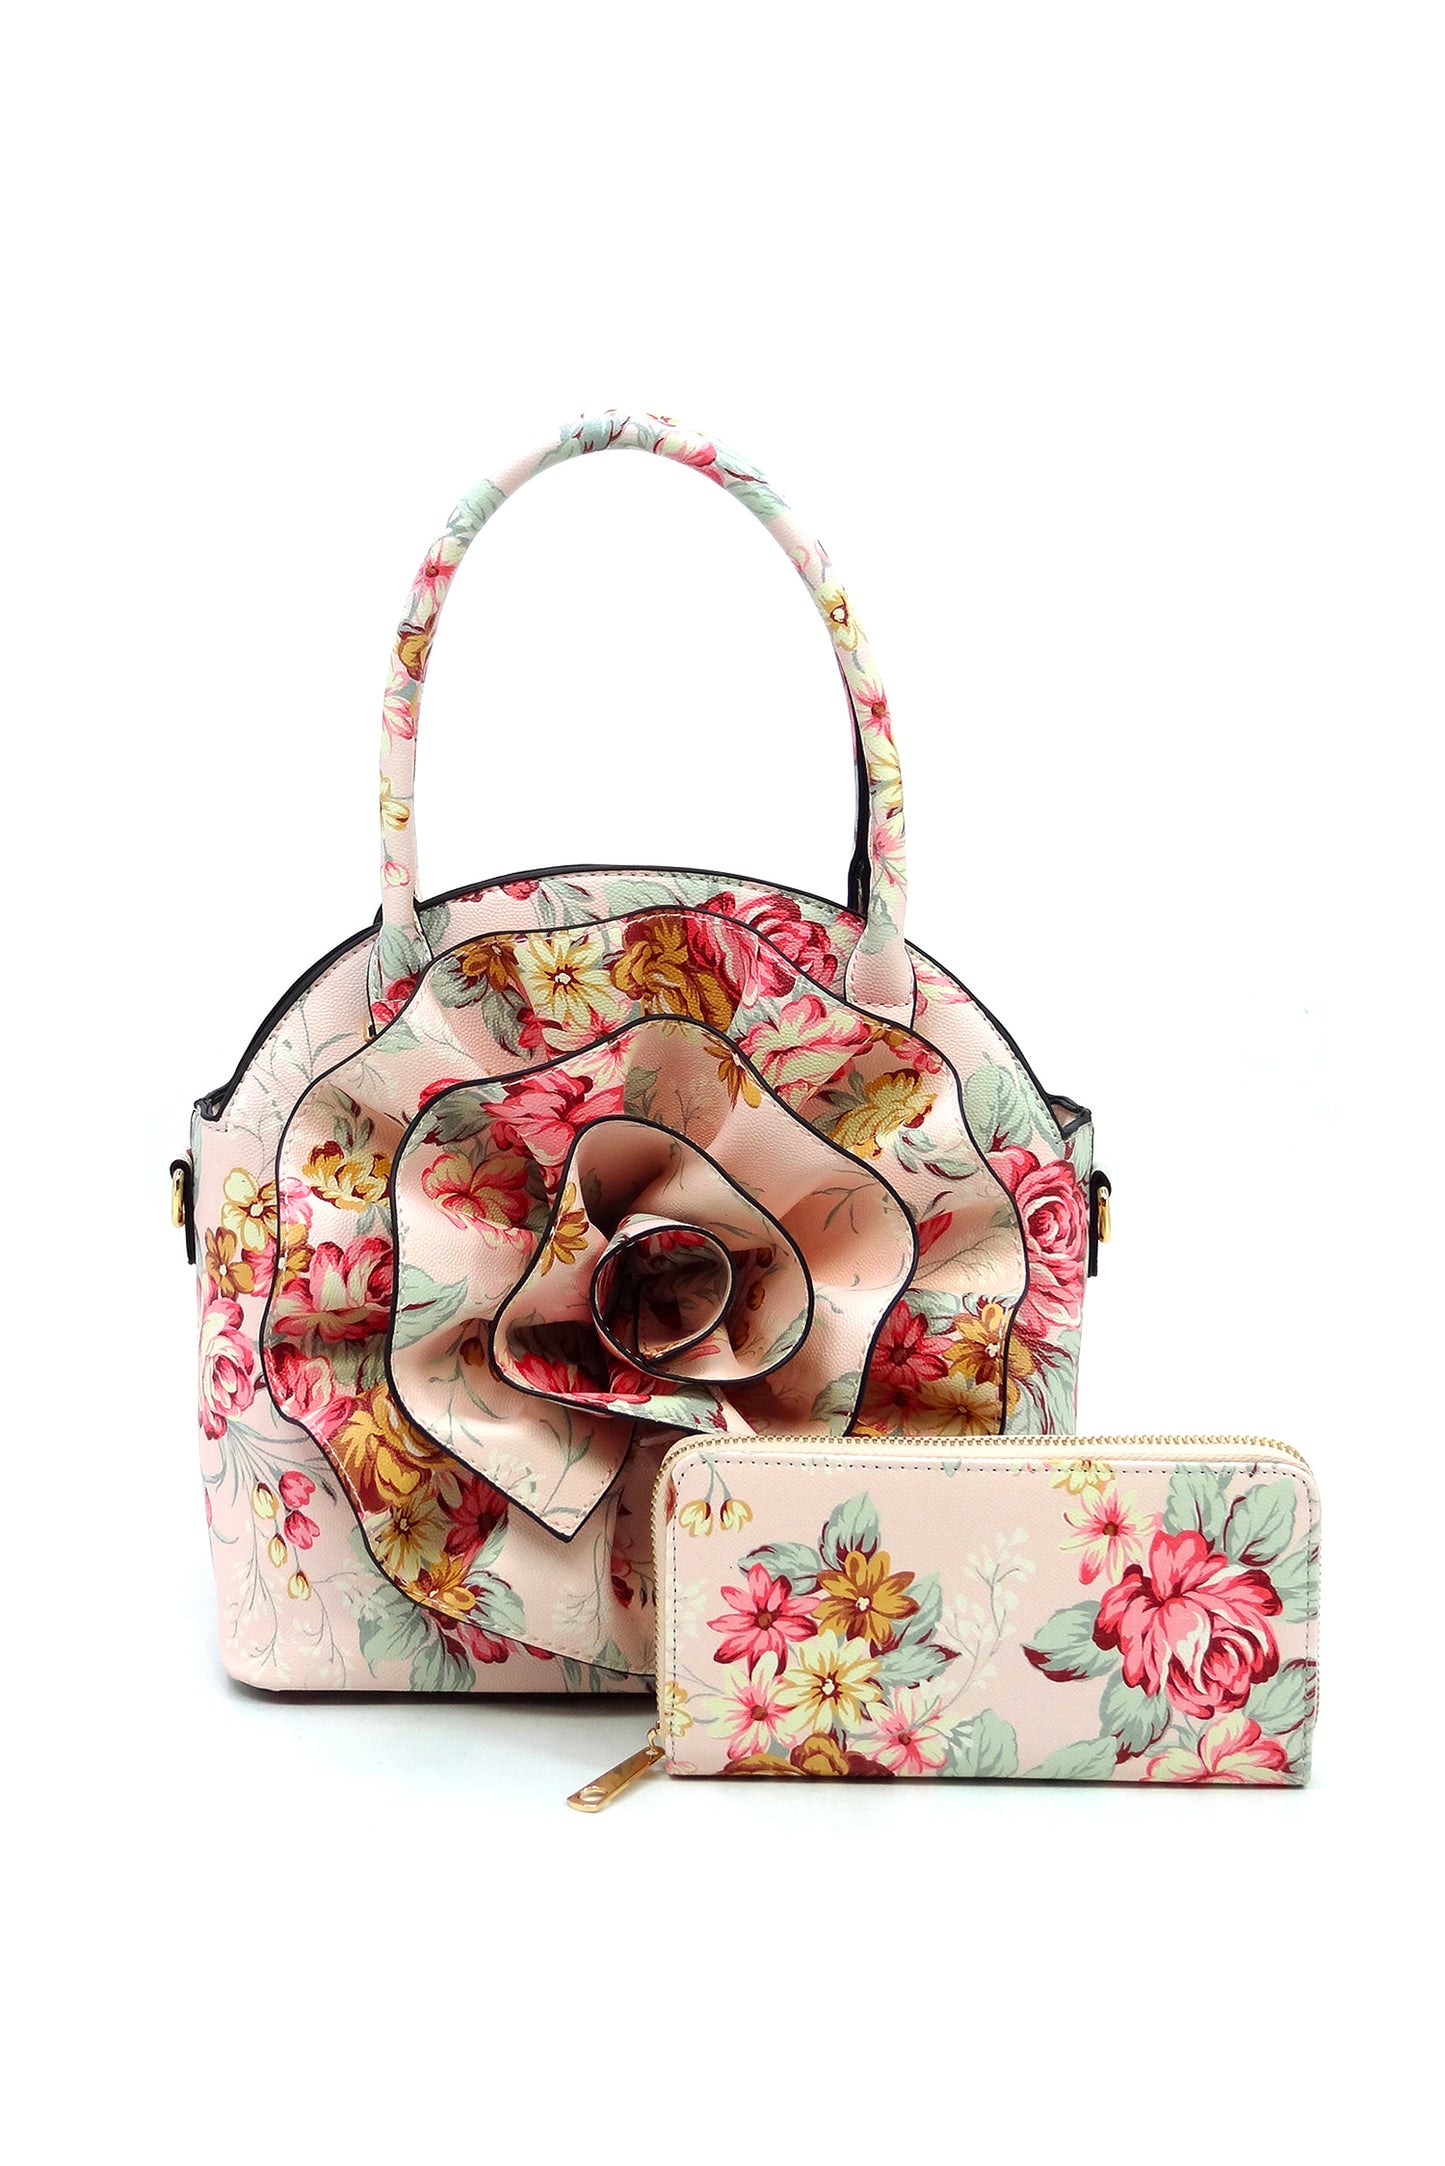 Load image into Gallery viewer, Rosie Handbag and Wallet Set | Rose Stitch Vegan Leather Purse Set
